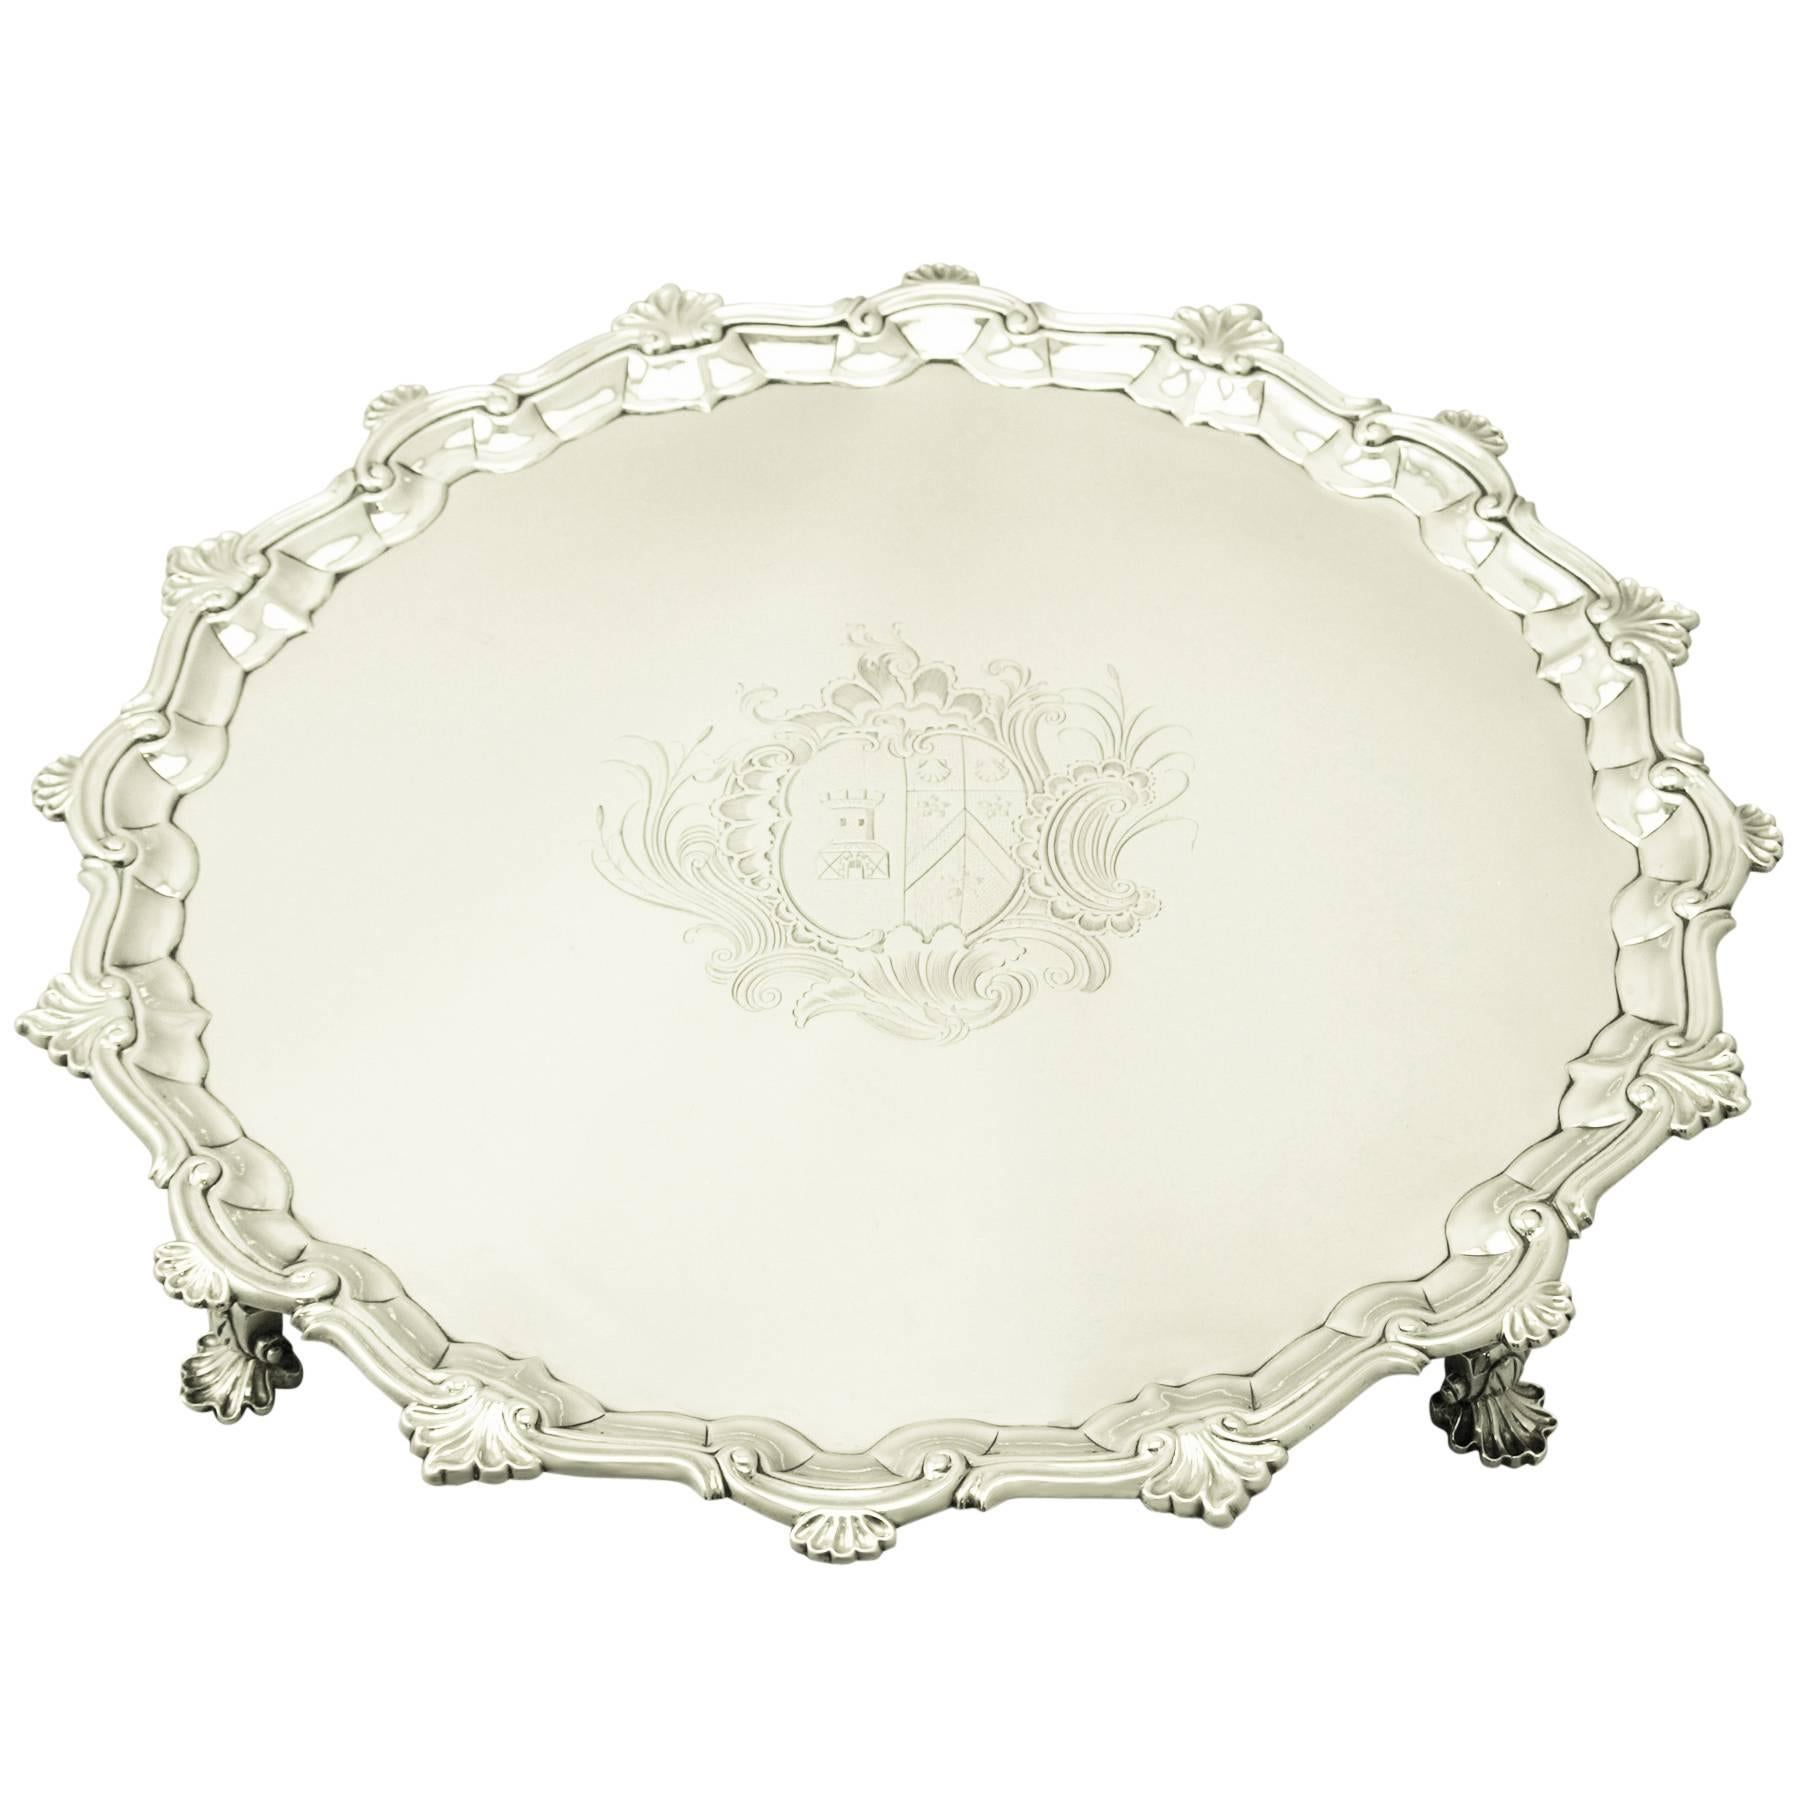 1740s Antique George II Sterling Silver Salver by William Peaston